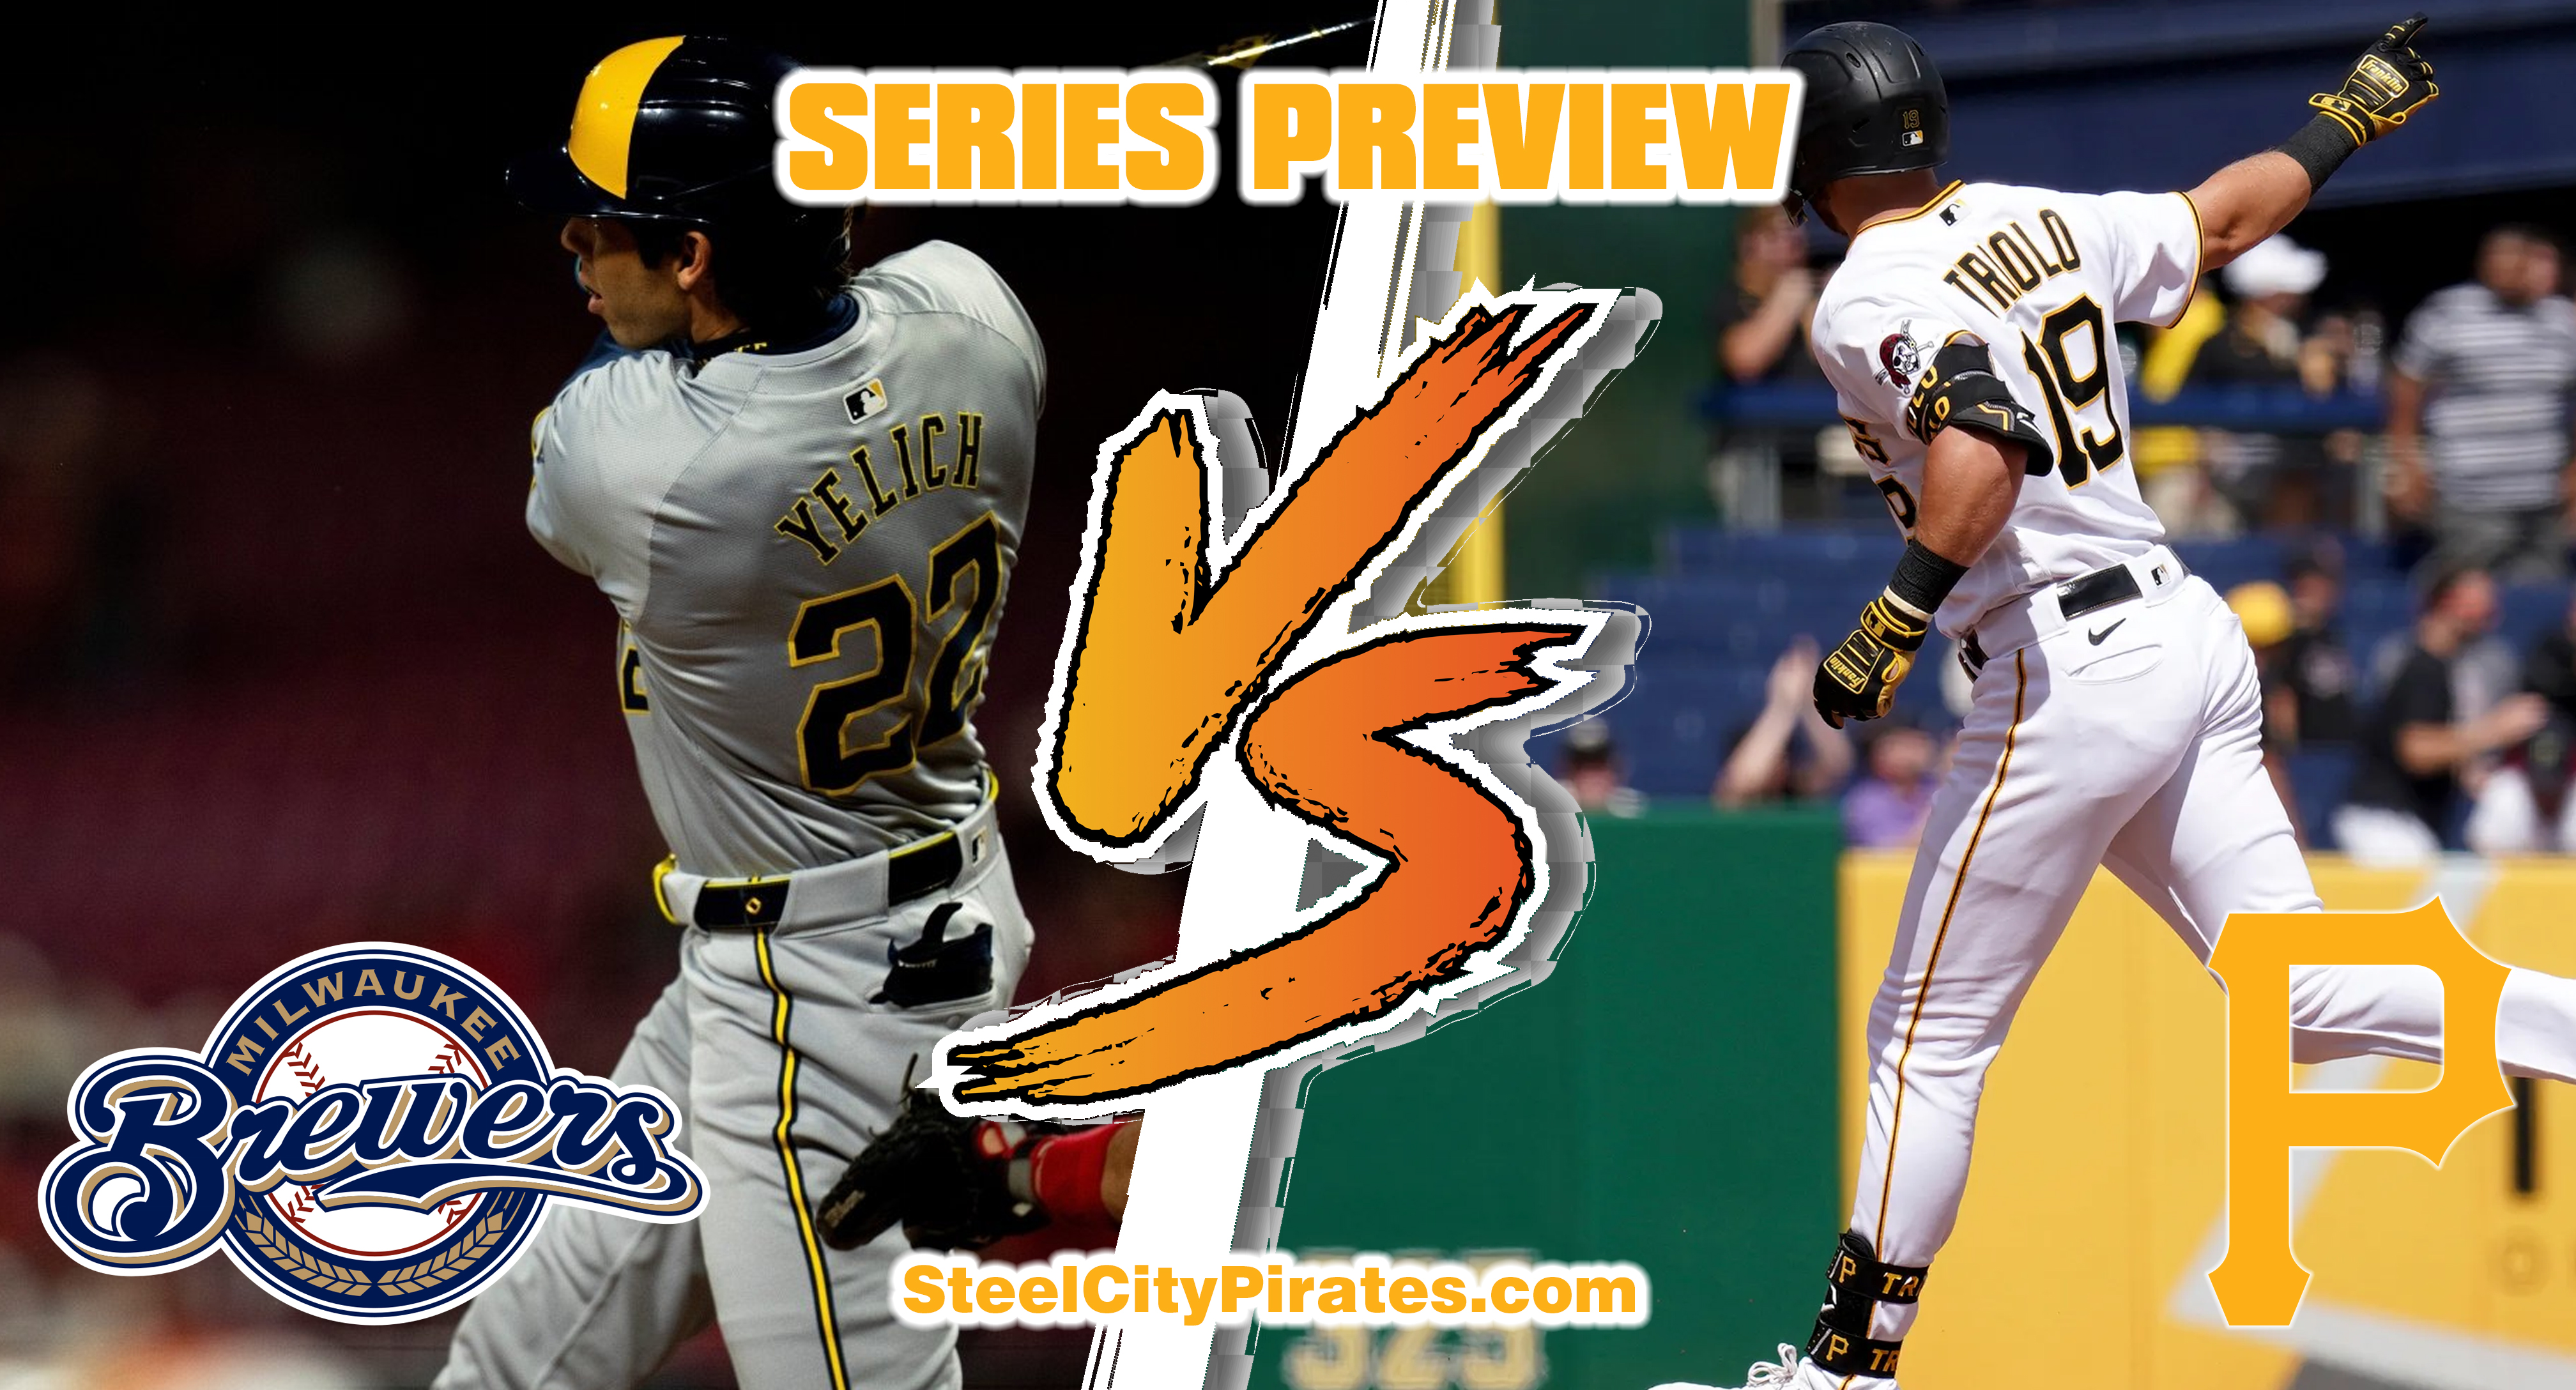 Series Preview: Pirates (18-23) at Brewers (24-16)